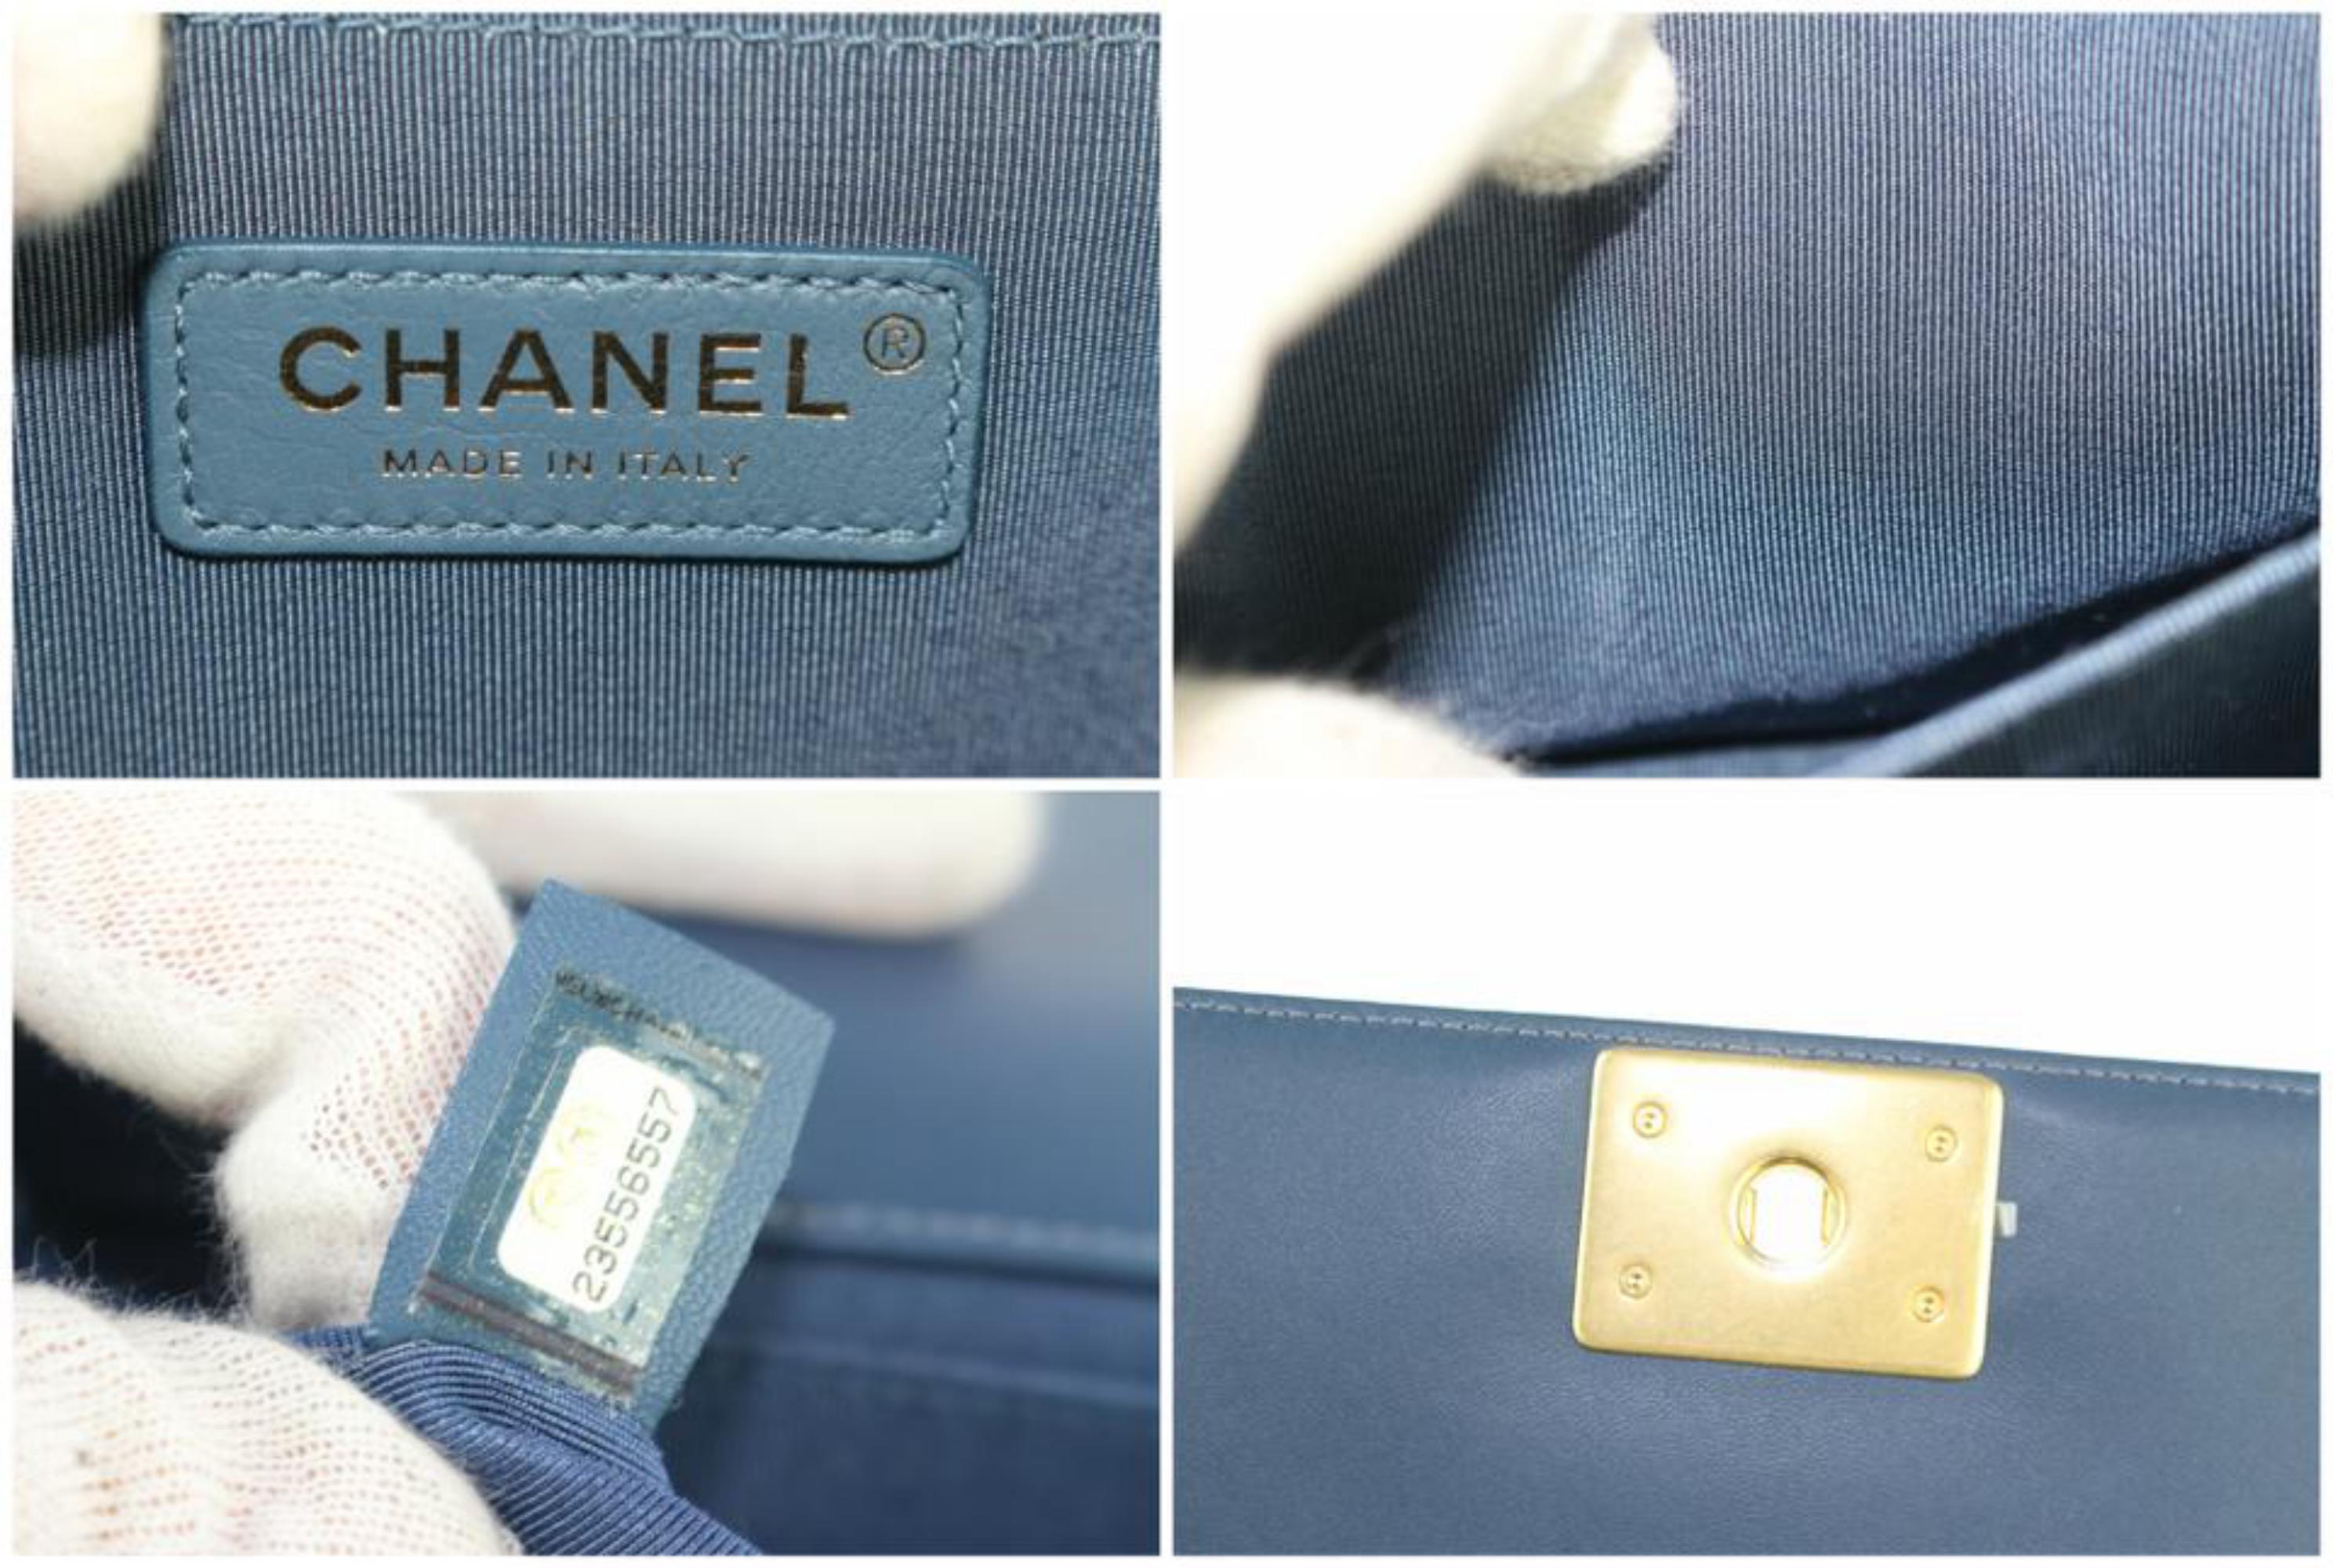 Gray Chanel Boy (Rare) Limited Edition Chevron 2cz1812 Blue Leather Cross Body Bag For Sale